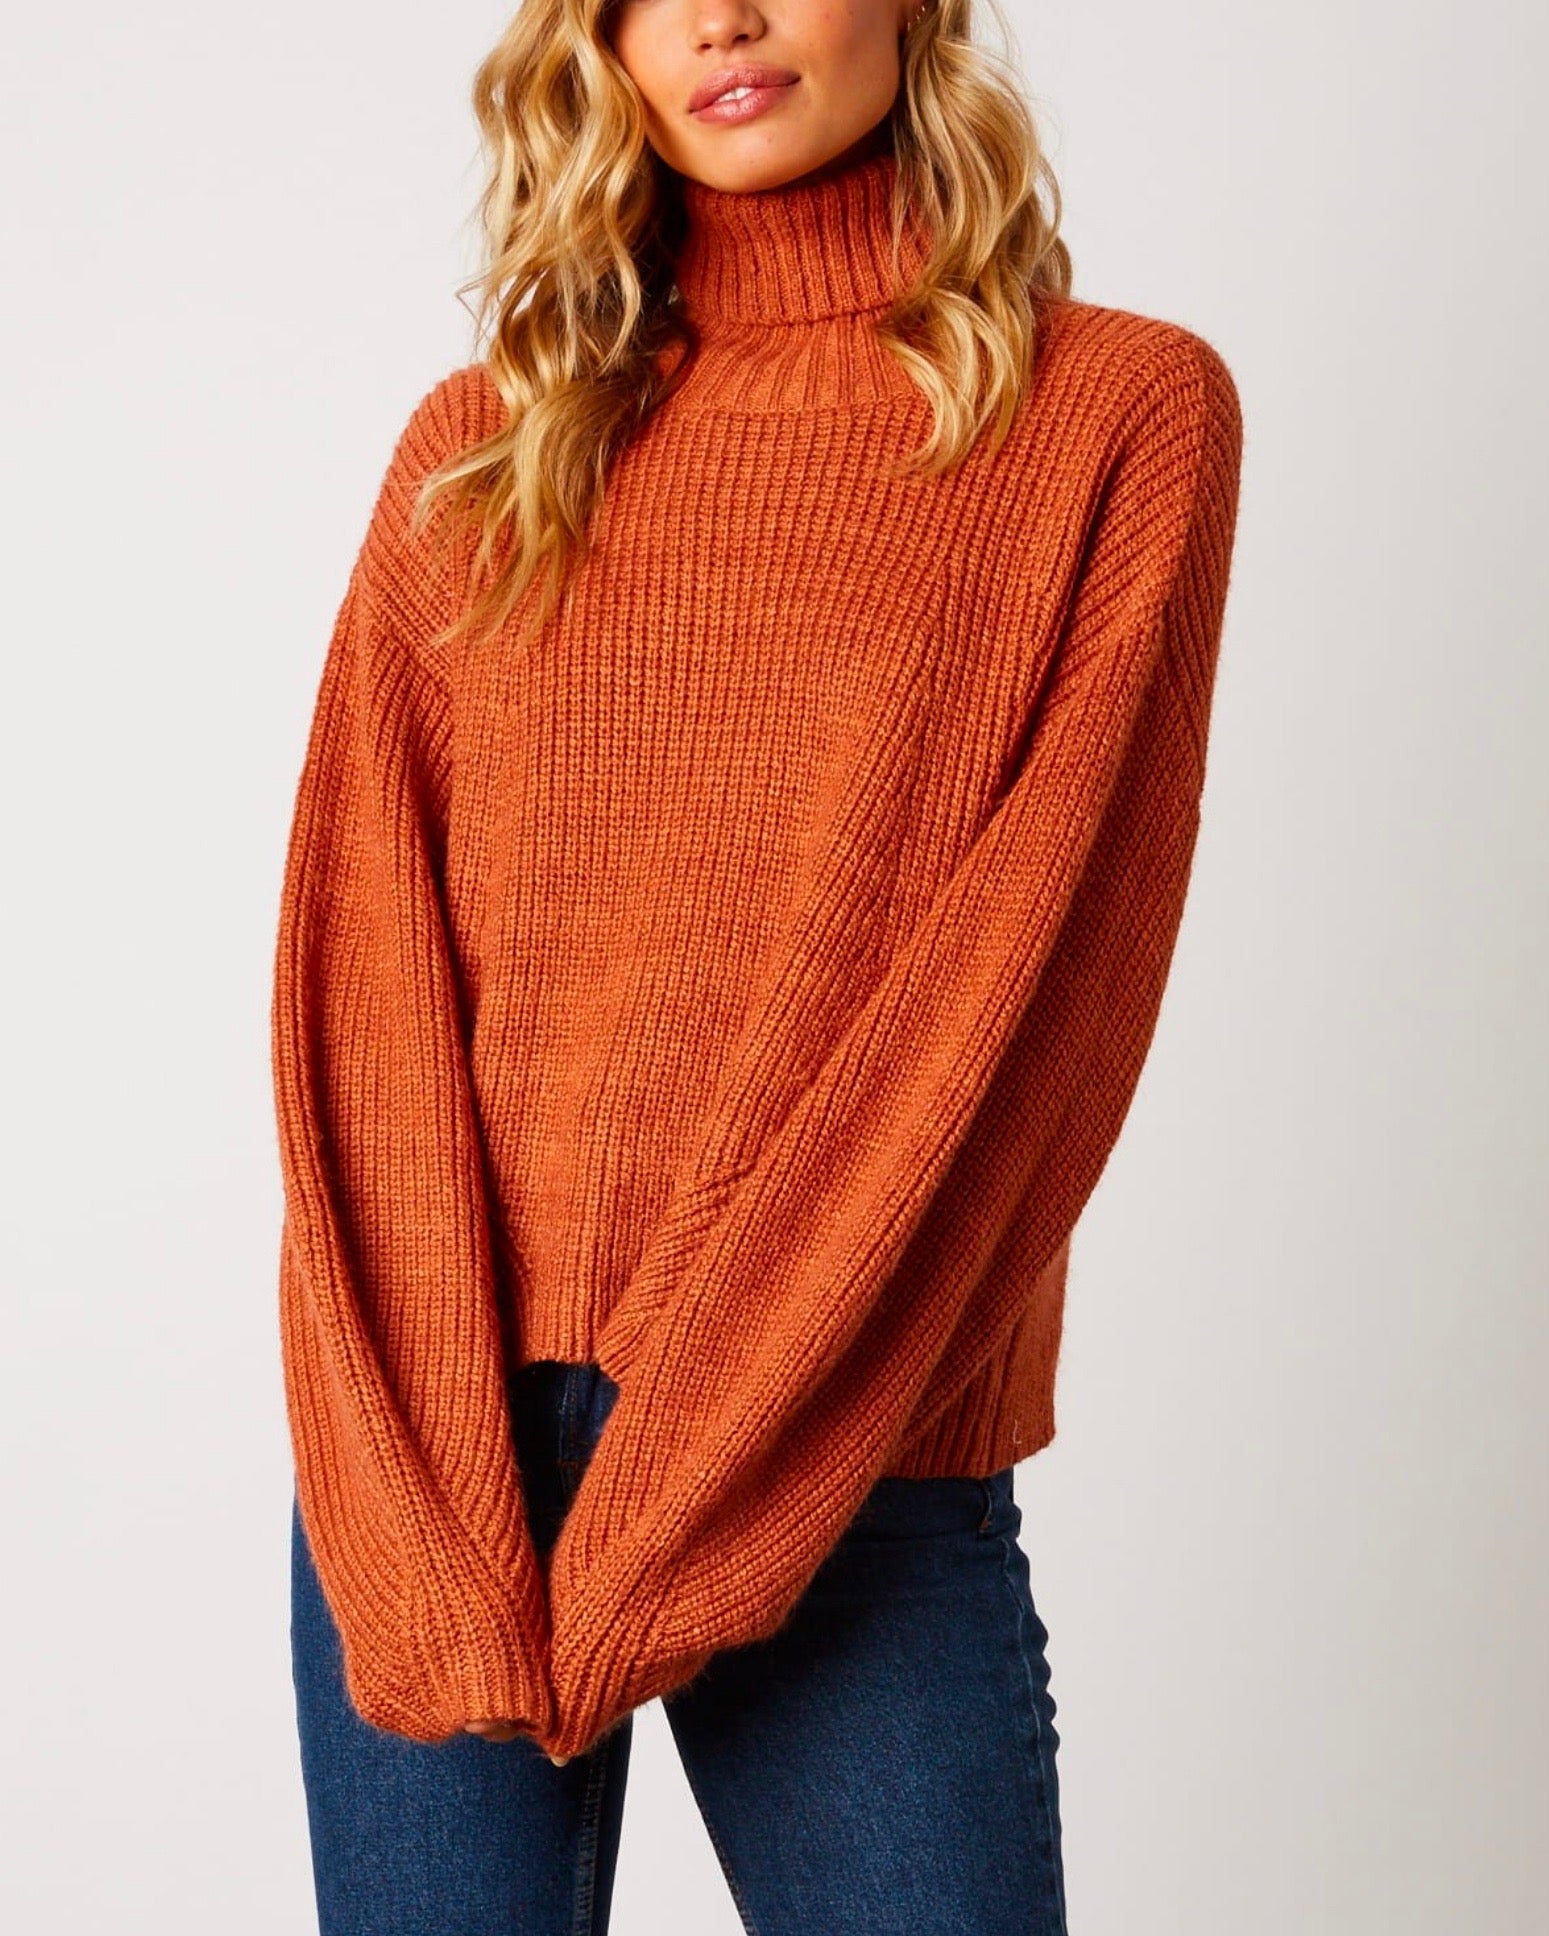 Boxy Turtle Neck Dropped Shoulder Sweater with Balloon Sleeves in ...